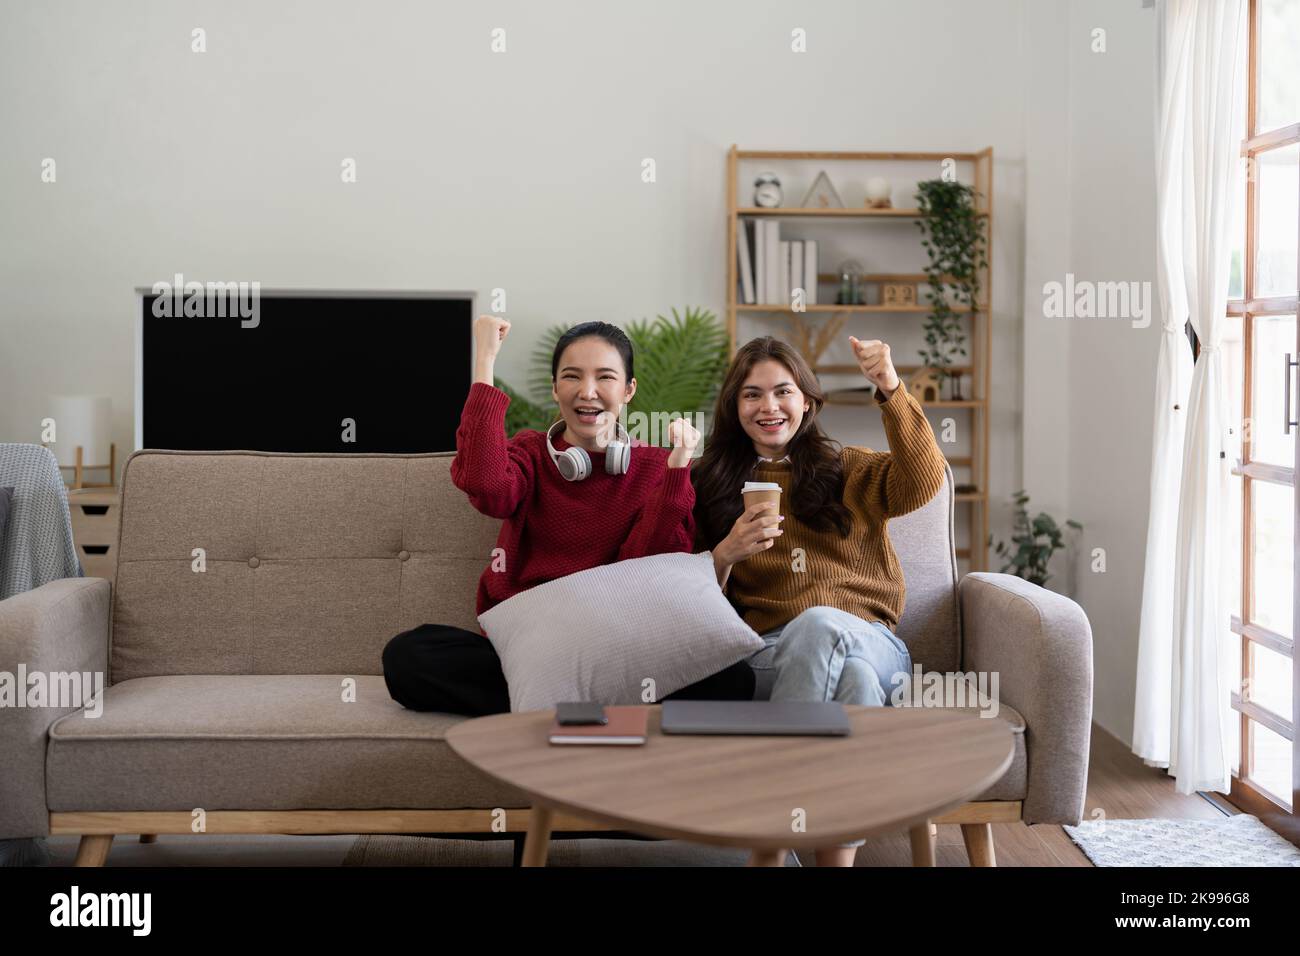 Multiethnic Group Of Young Woman Having Fun, Watching TV Stock Photo